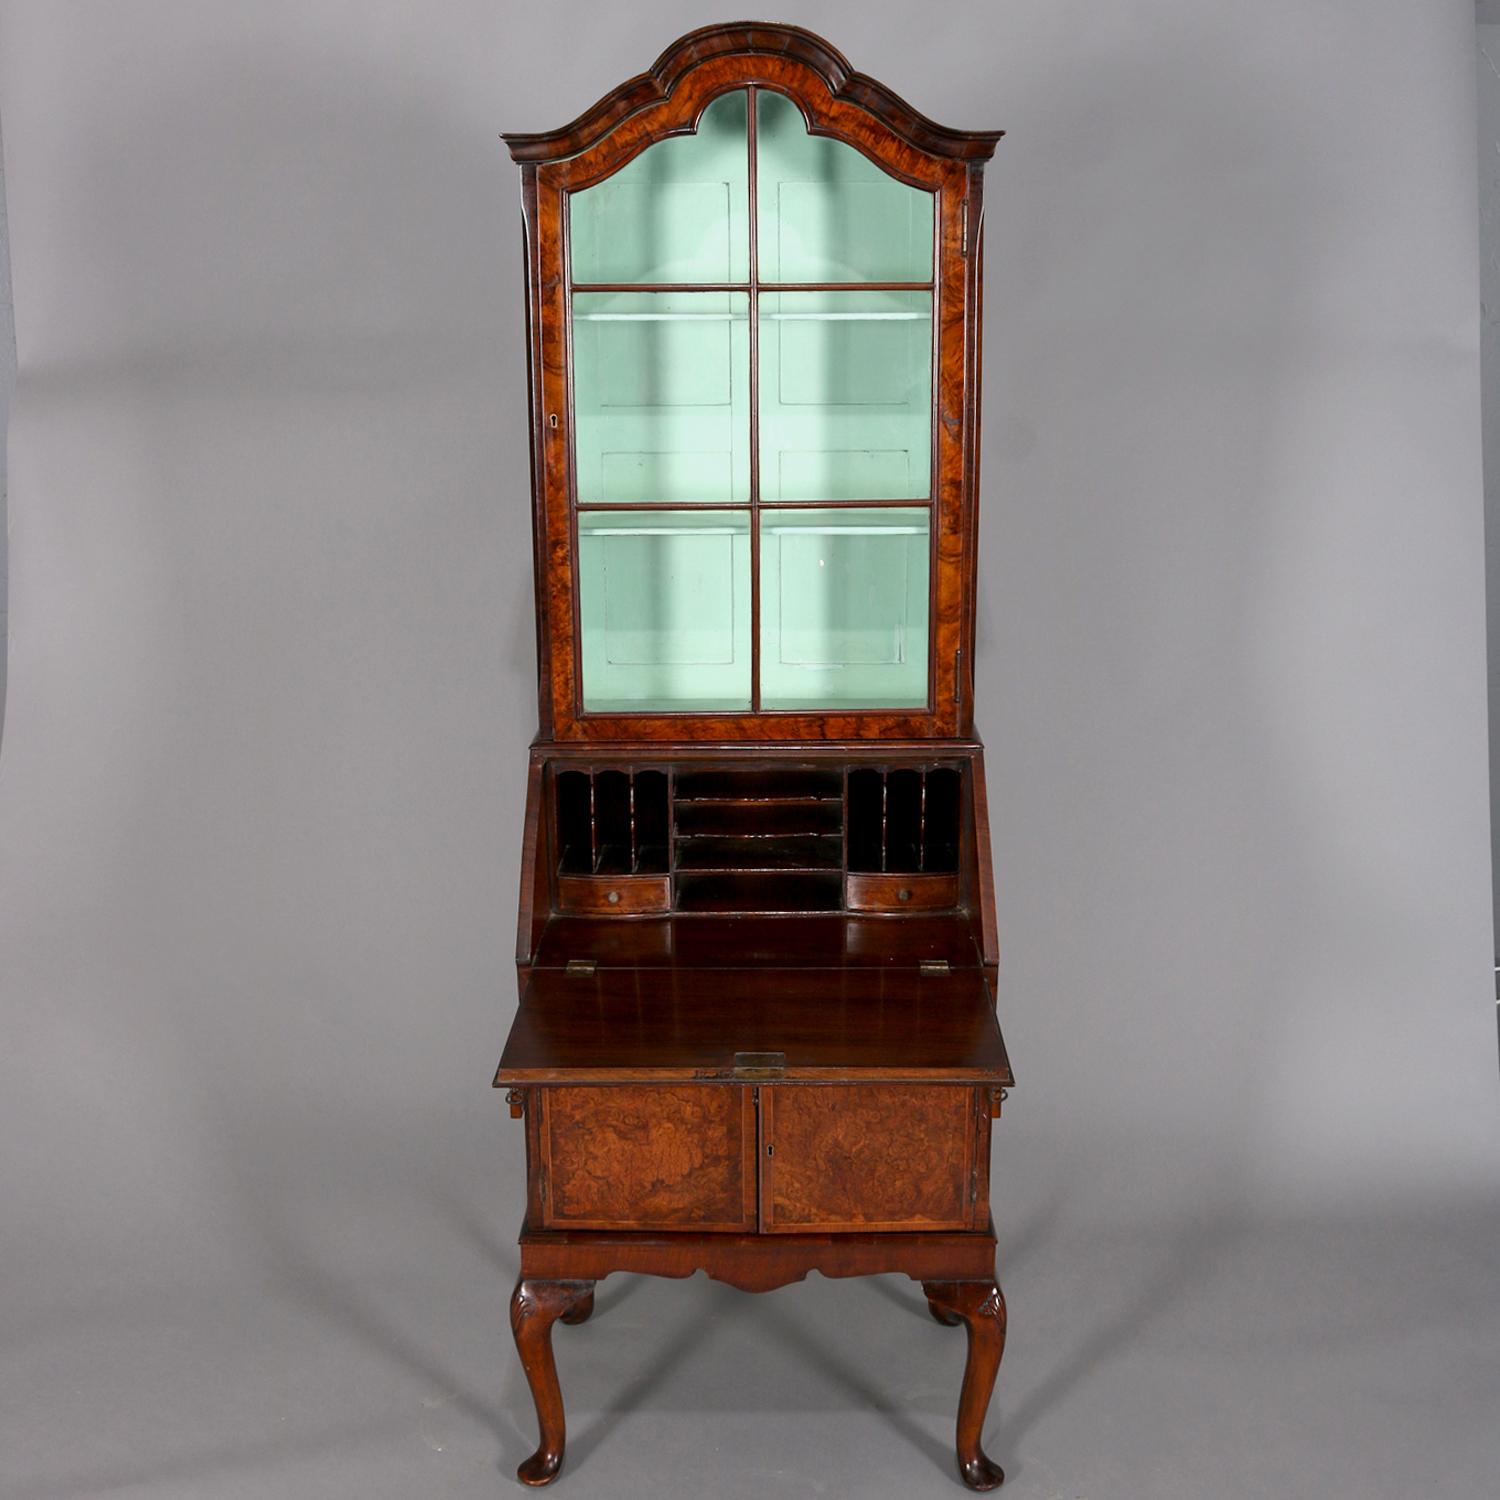 Antique English Georgian petite secretary features burled walnut with upper bookcase with shaped crest over single glass door opening to shelved interior and above desk with slant front opening to writing surface with interior drawers and pigeon